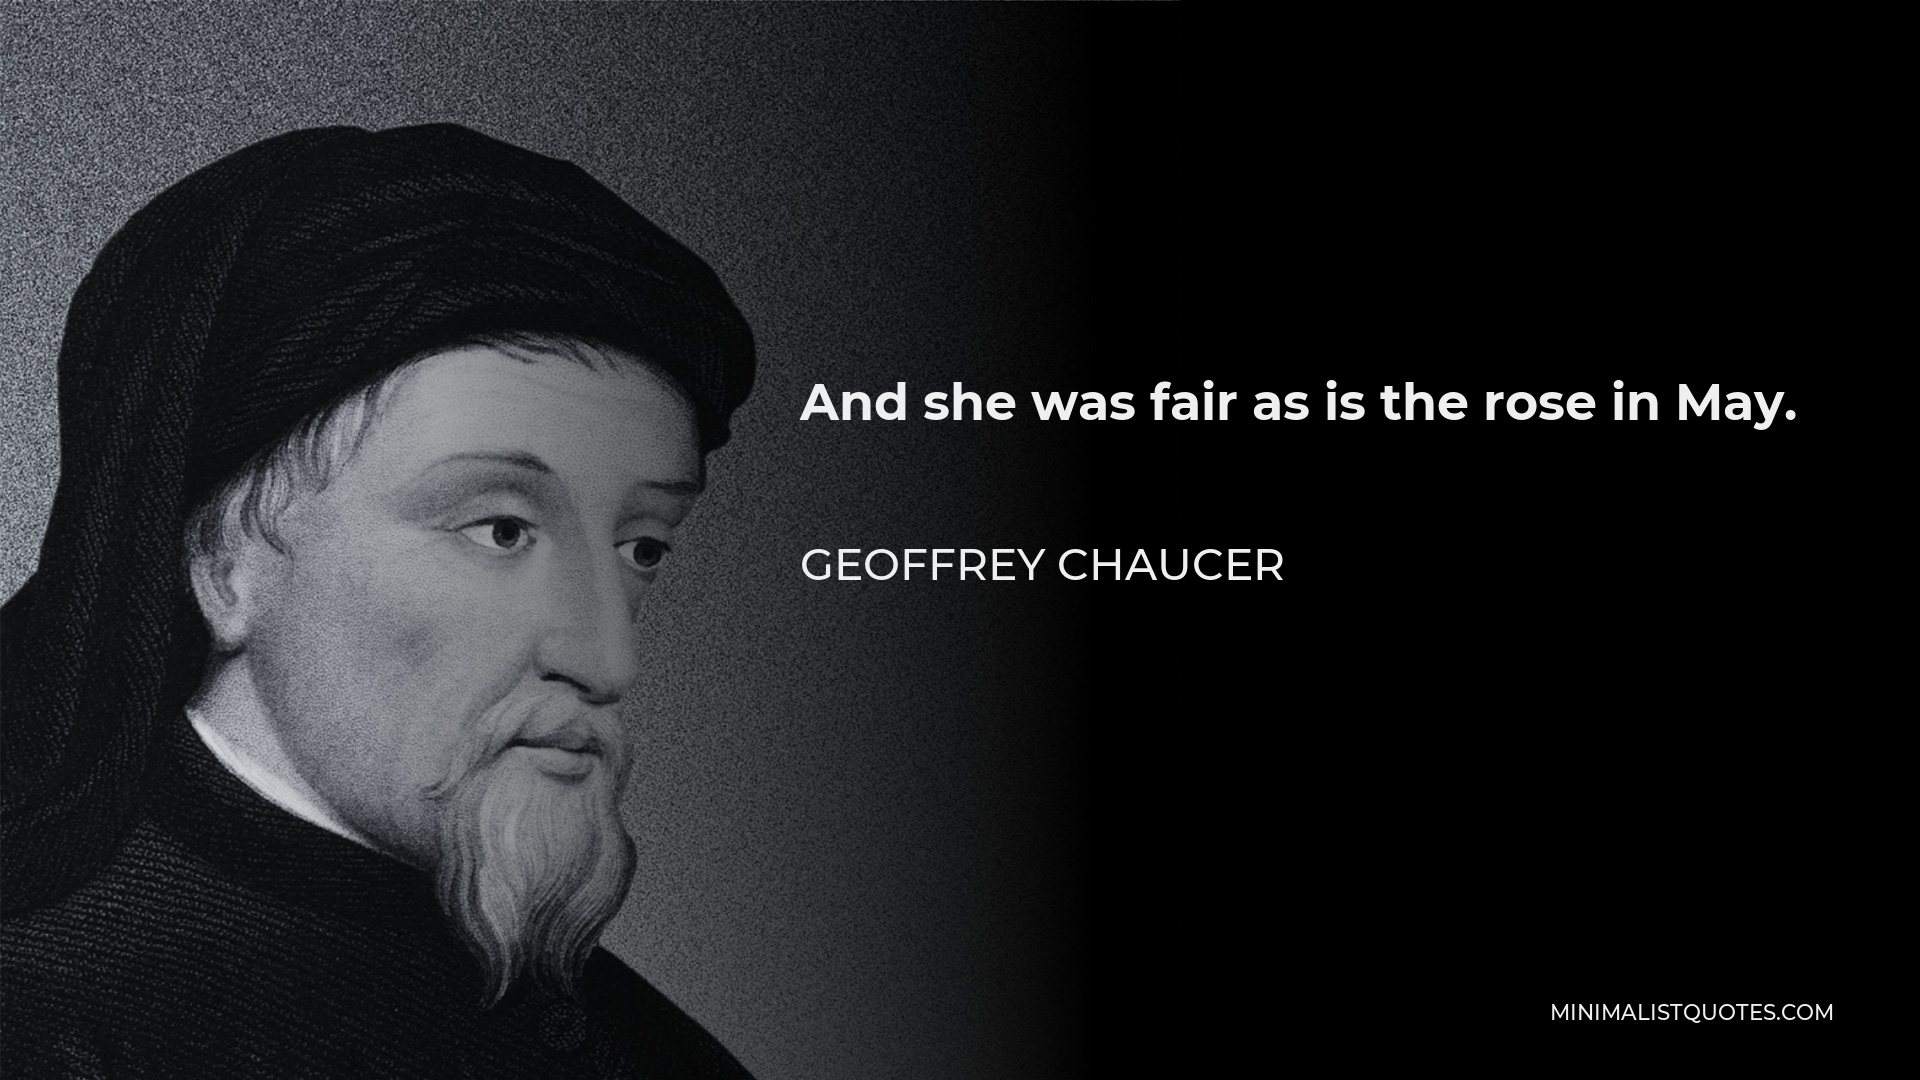 Geoffrey Chaucer Quote - And she was fair as is the rose in May.